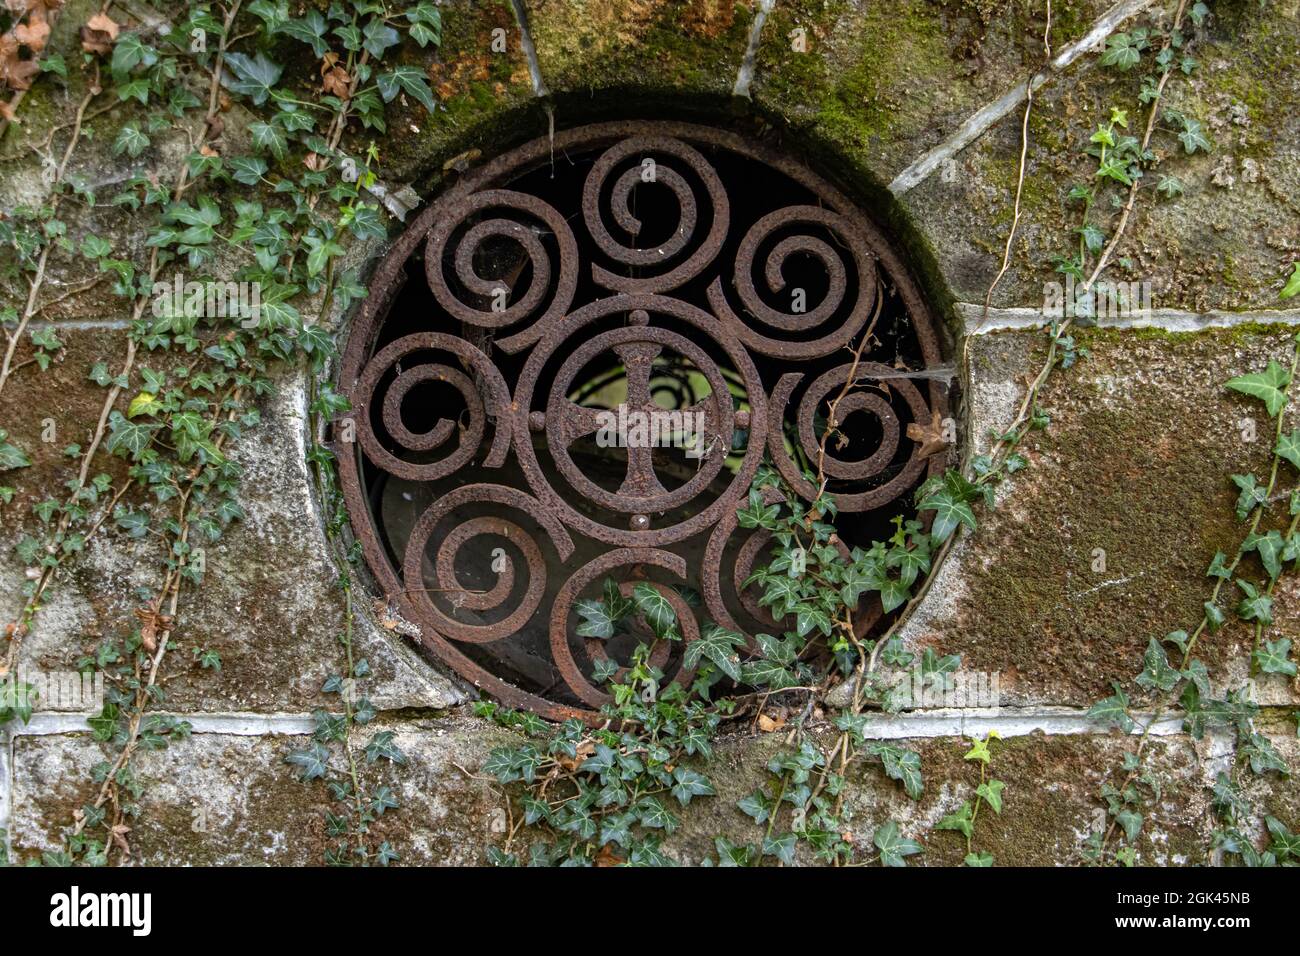 A Round window with bars in a historic stone tomb. Stock Photo